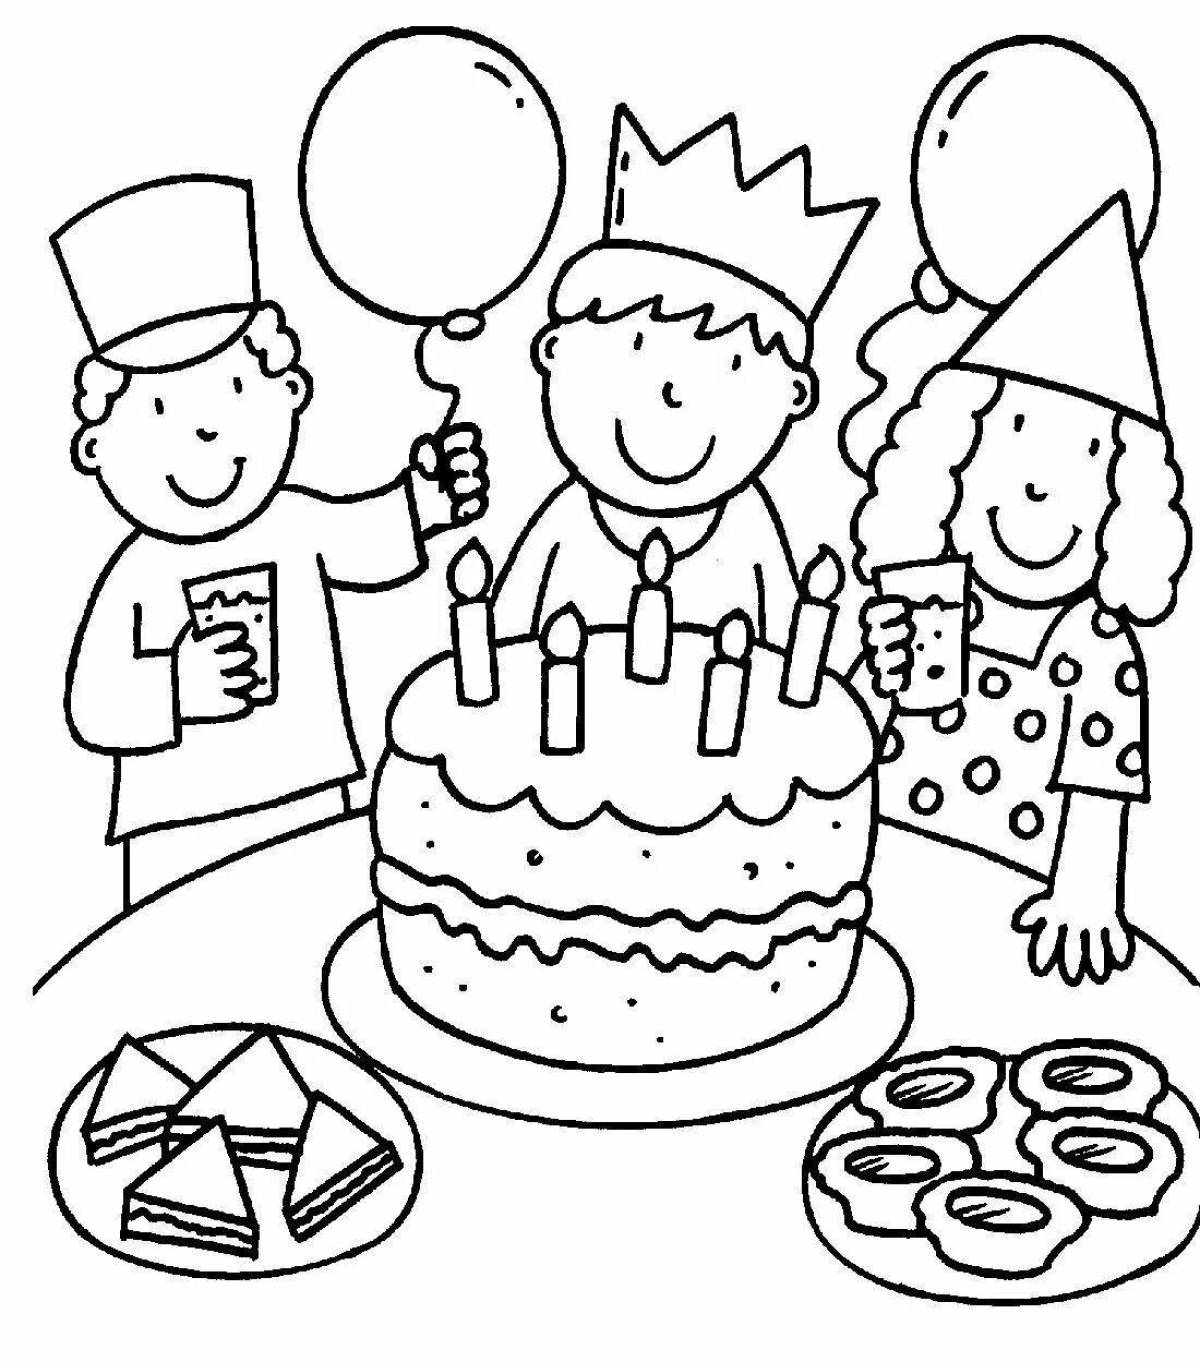 Jolly dad happy birthday coloring pages for kids